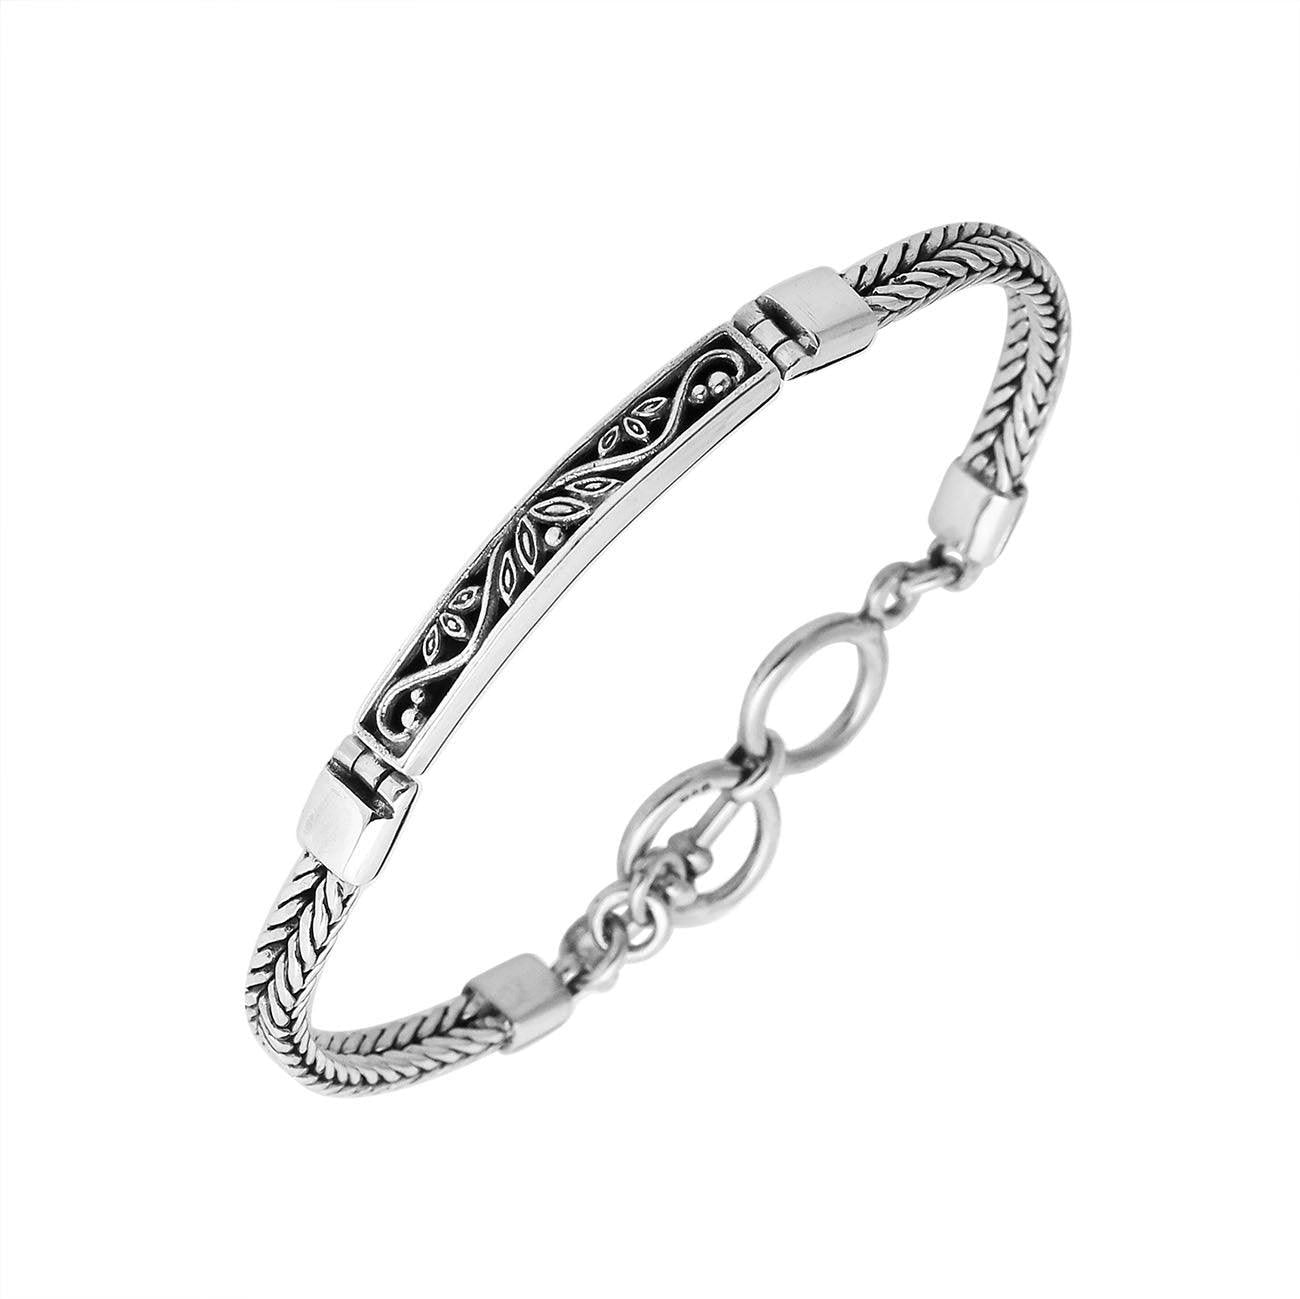 Balinese Sterling Silver 3 mm Tag Chain Bracelet - Inspiring Jewellery